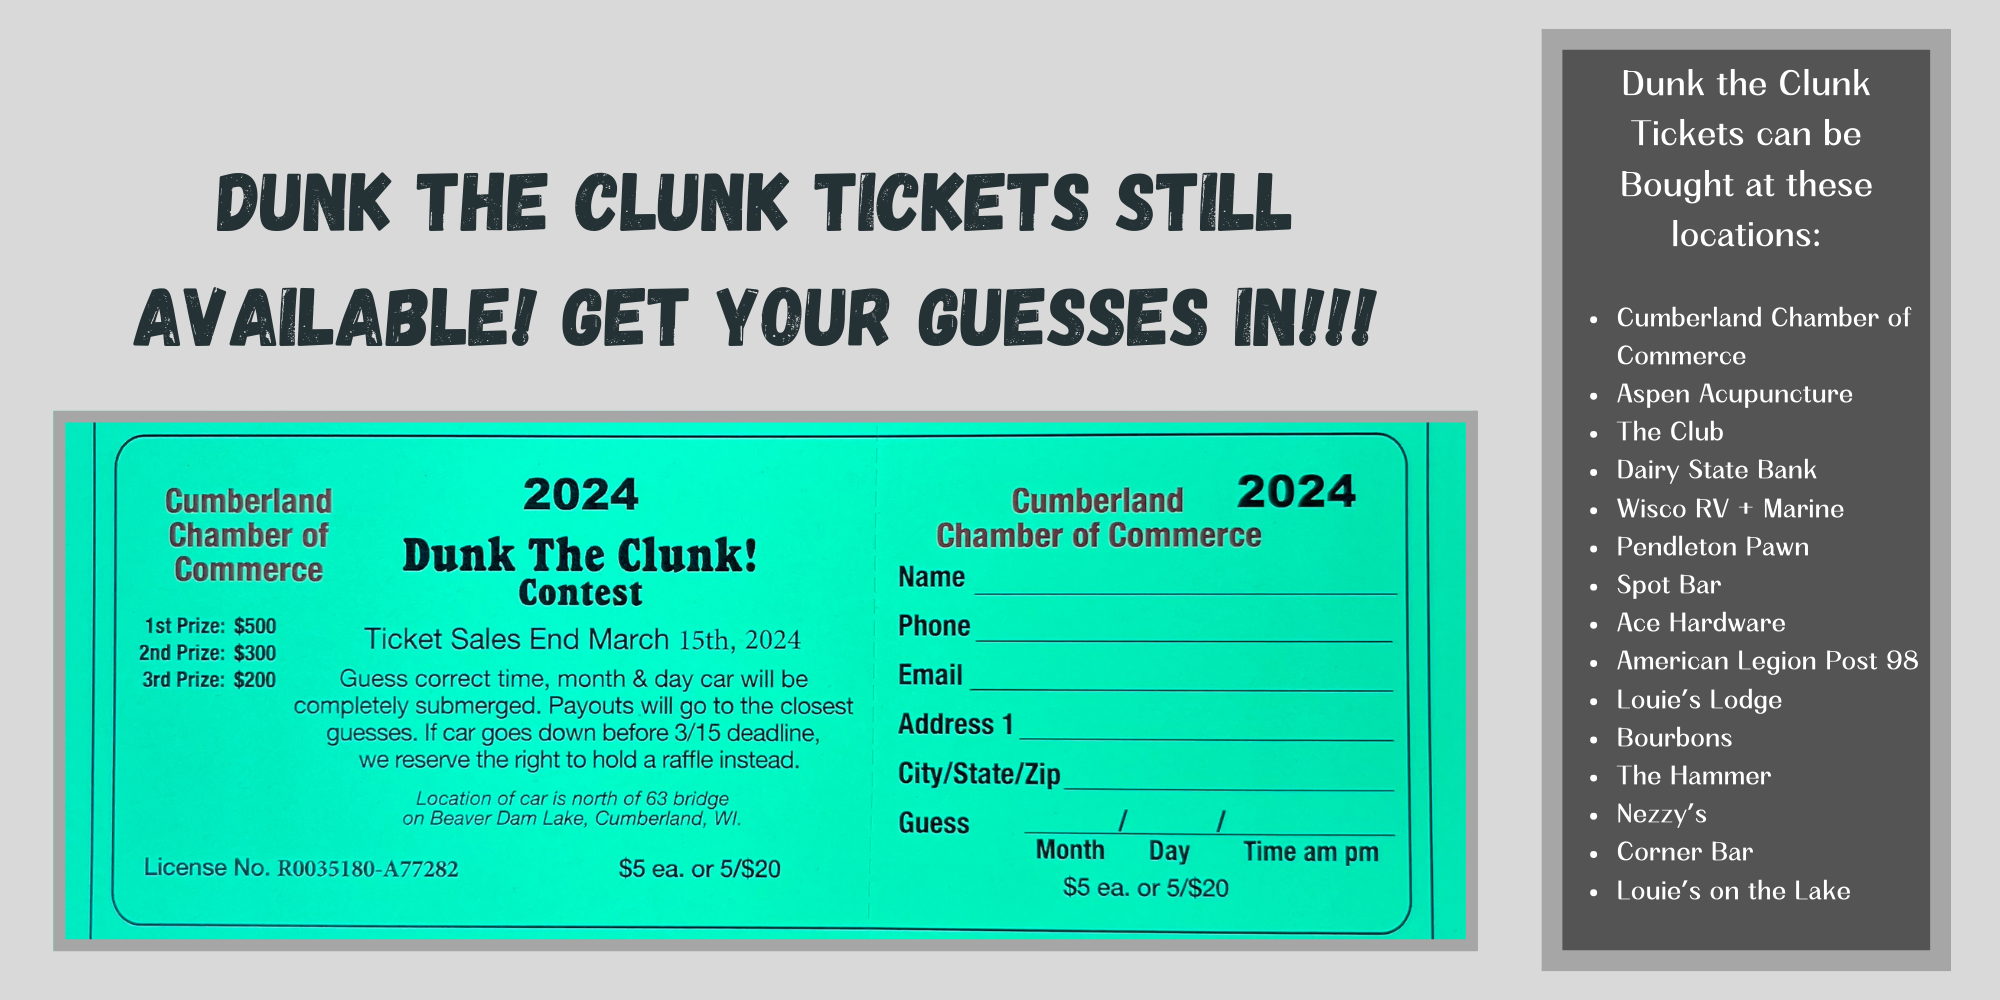 Dunk The Clunk Tickets still available! Get your guesses in!!!